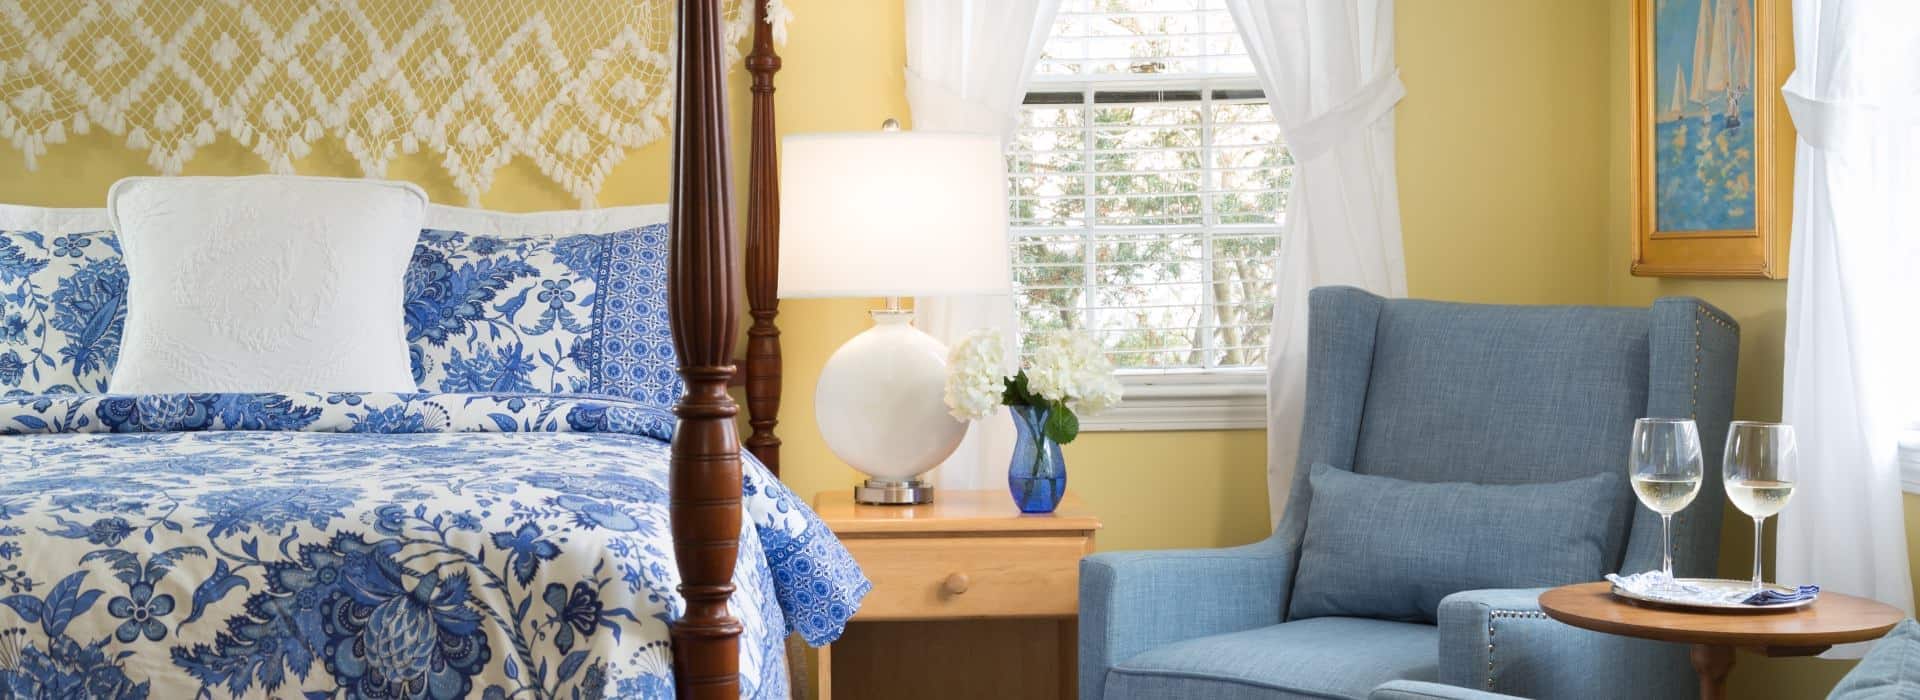 Bedroom with yellow walls, dark wooden four-poster bed, blue and white paisley bedding, denim upholstered arm chair